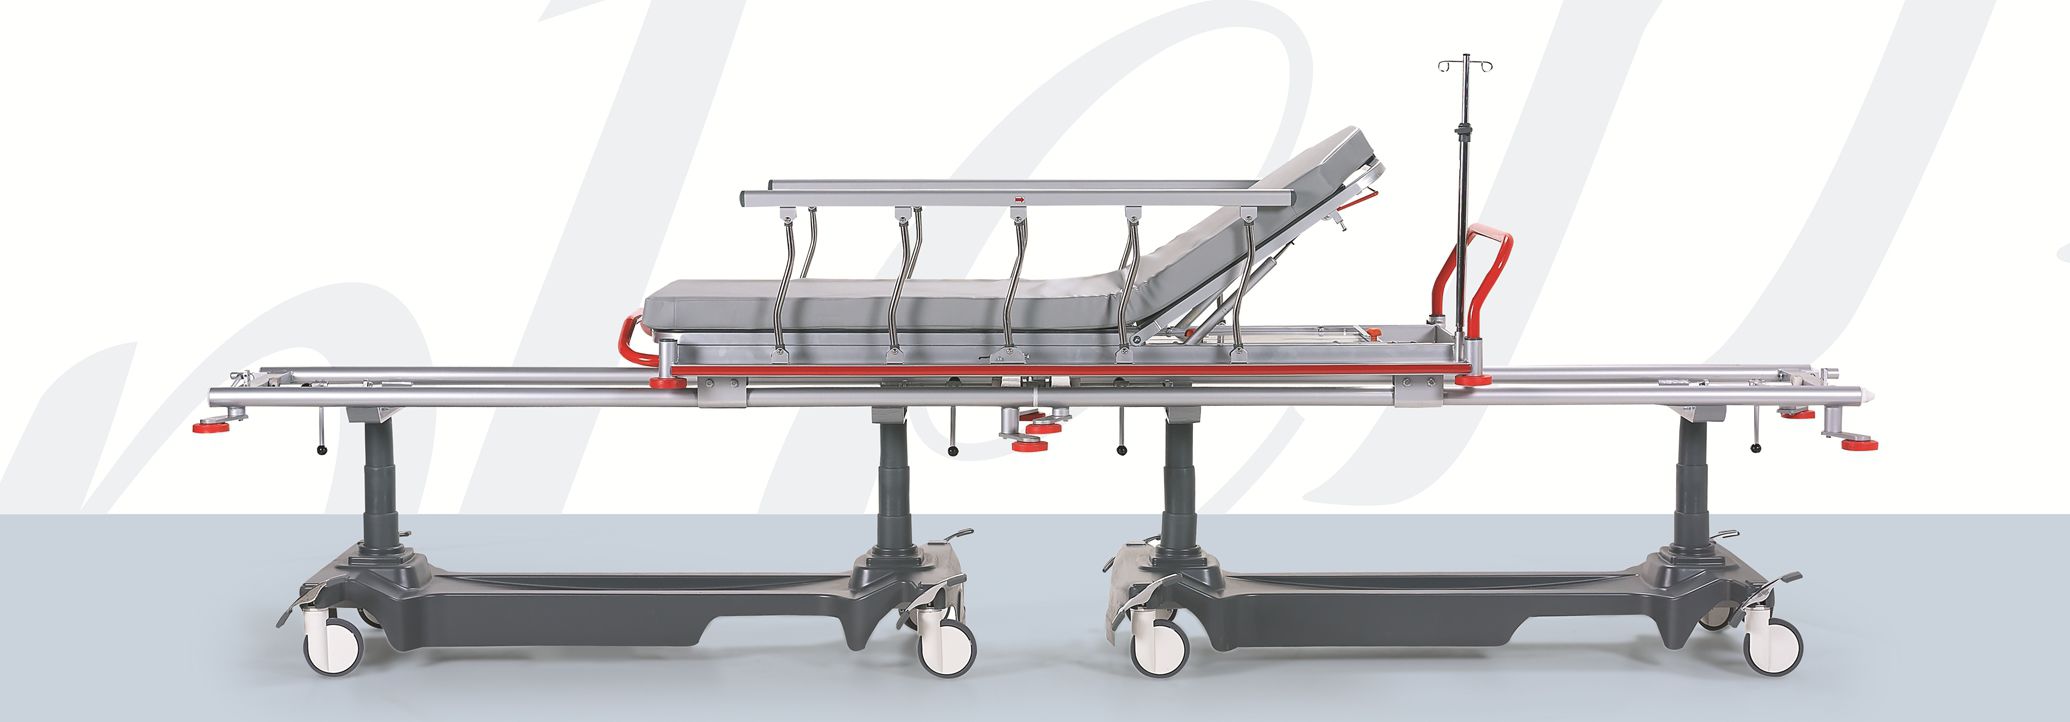 Patient transfer stretcher trolley / mechanical / 2-section NTCR SD06 Nitrocare